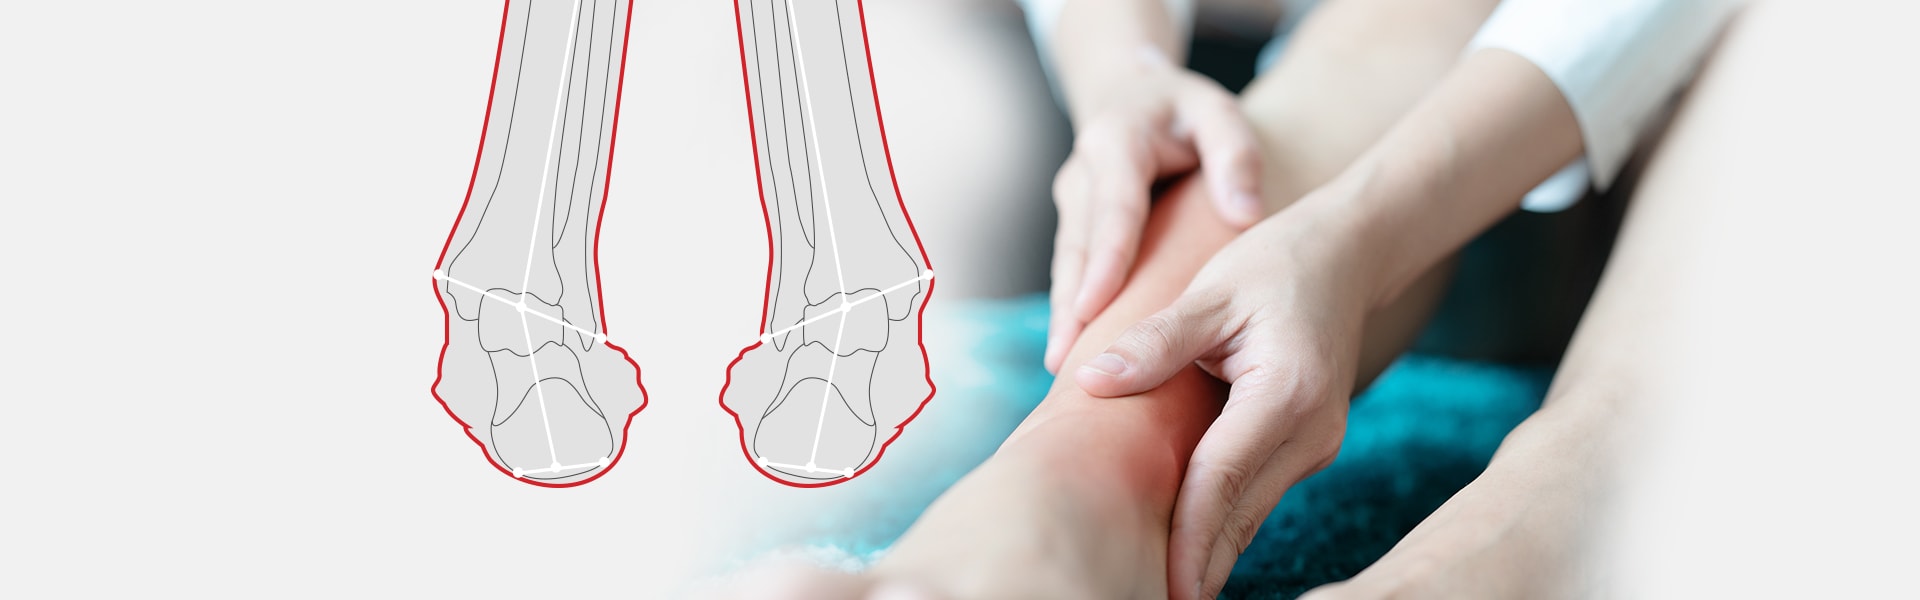 Foot/Ankle feature: What are Pronation and Supination? What do